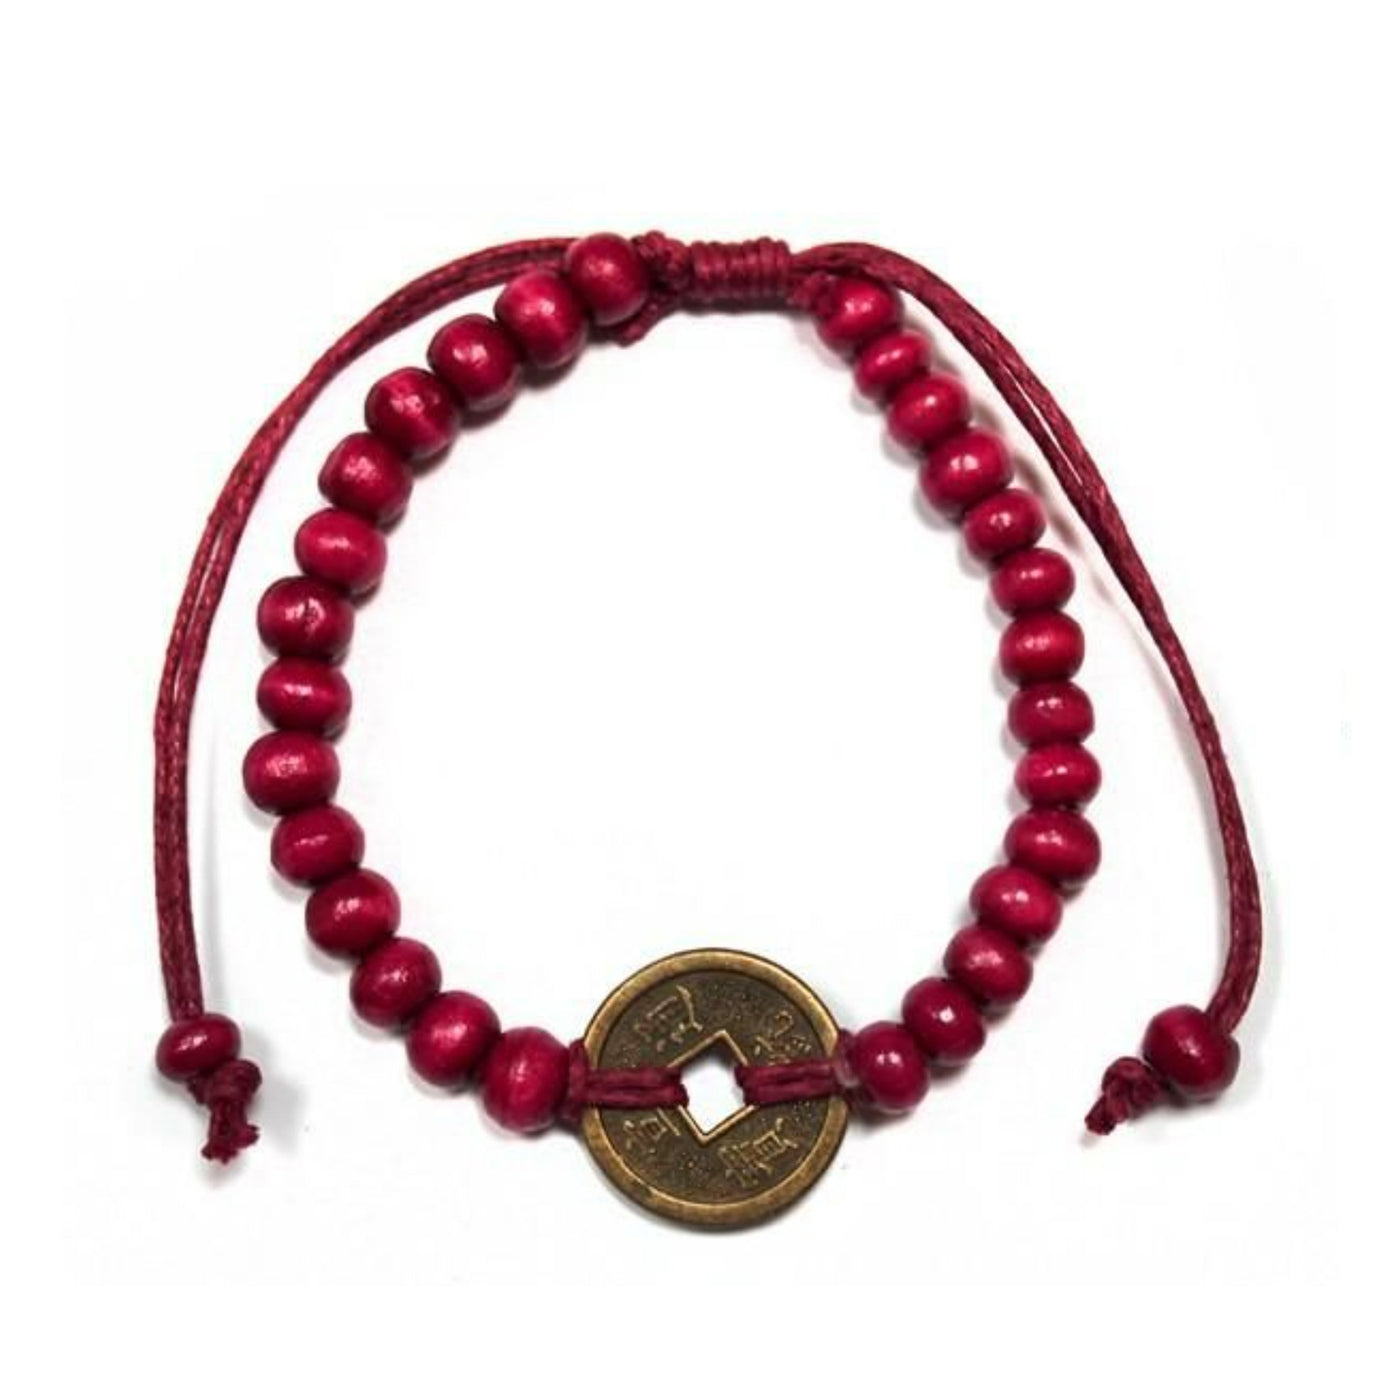 Unisex Red Good Luck Coin Of Fortune Feng-Shui Bracelets.